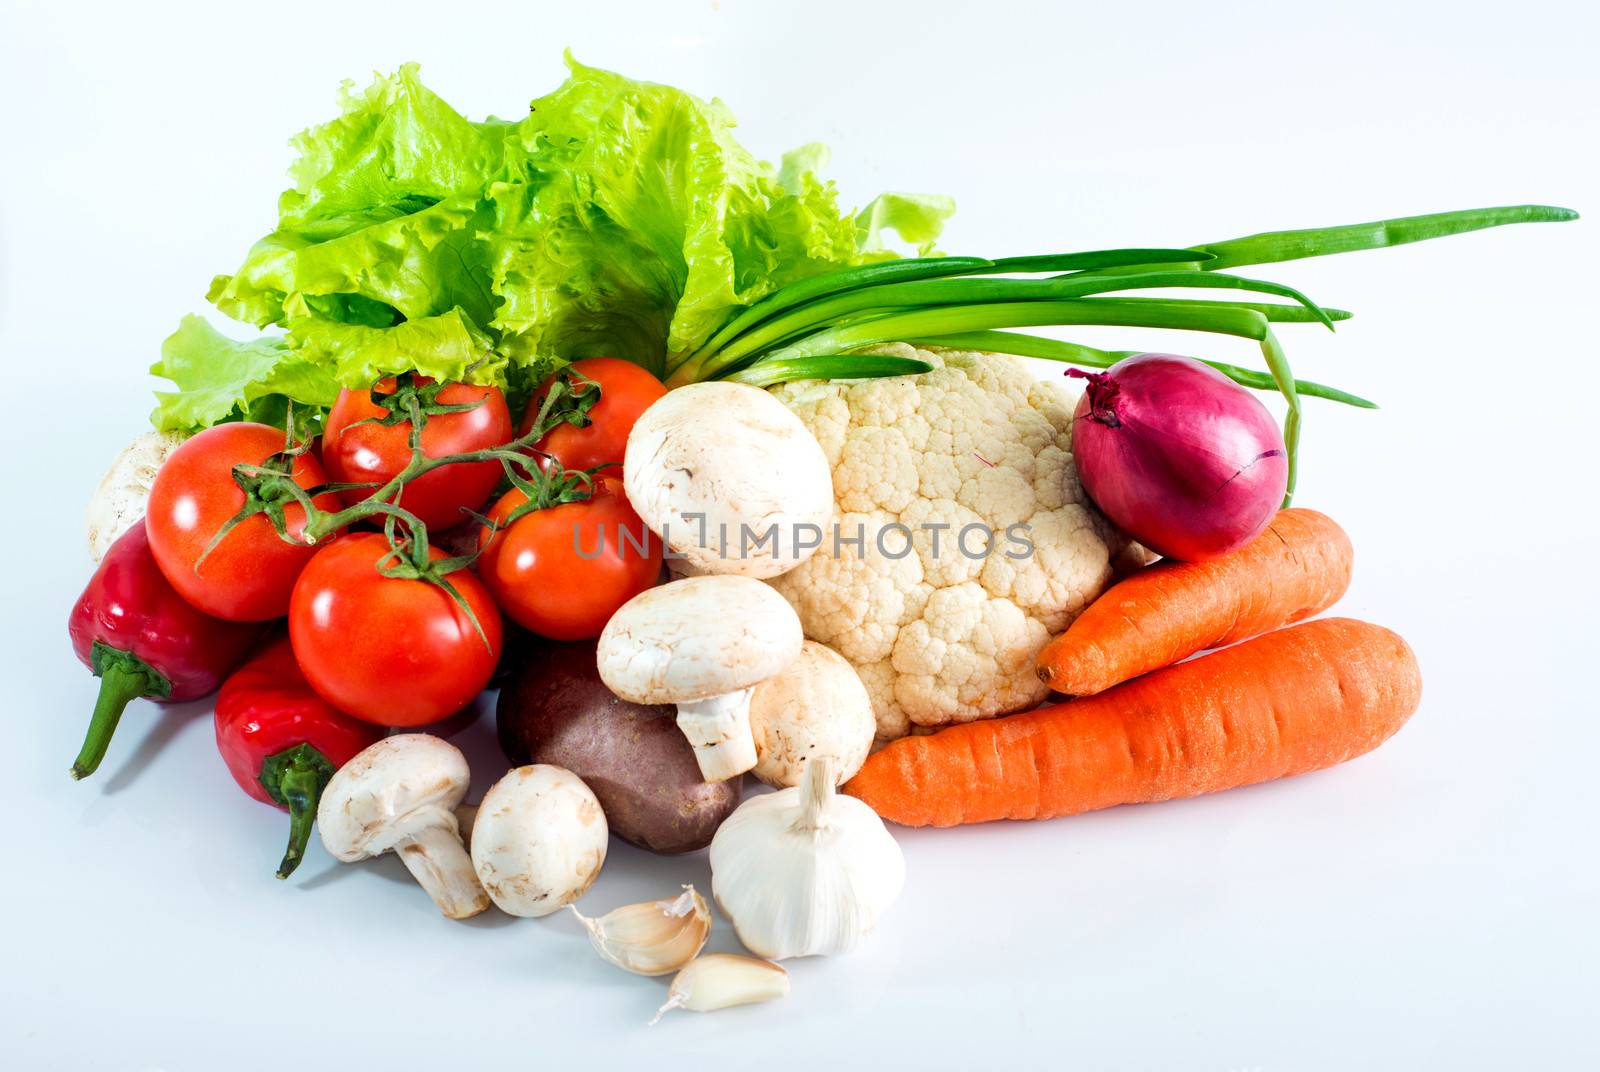 fruits and vegetables on a white background